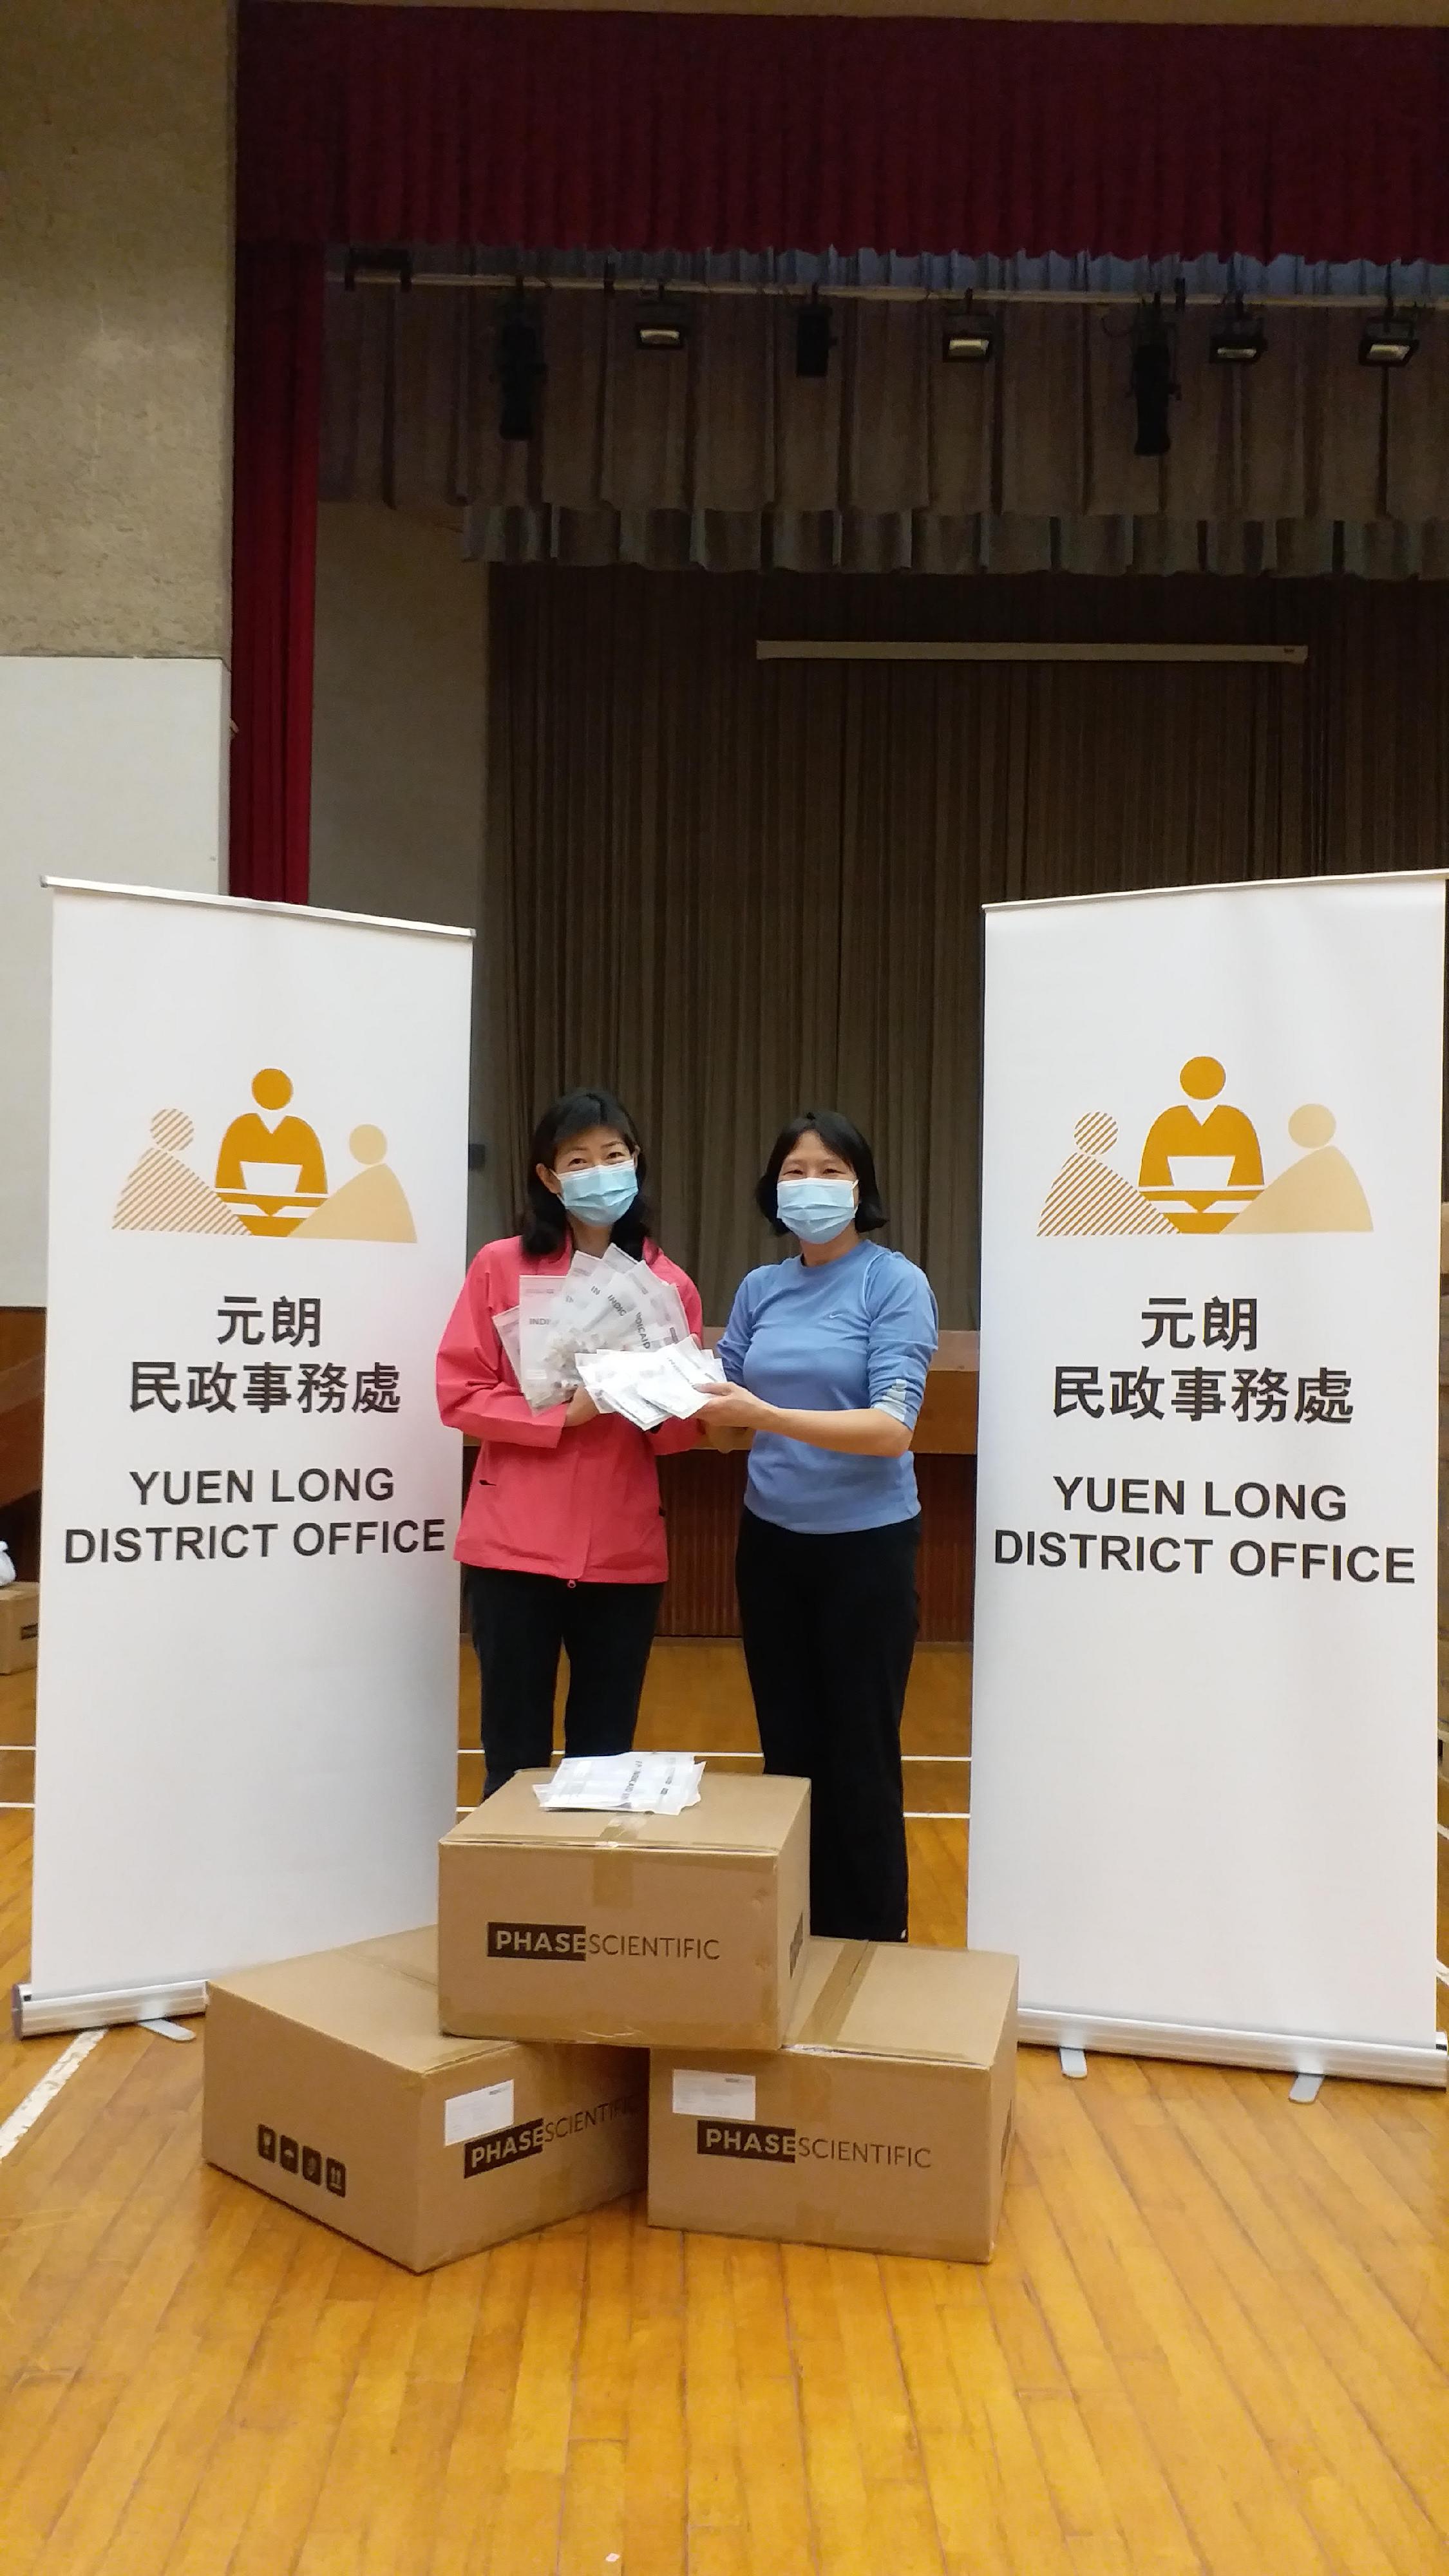 The Yuen Long District Office today (March 20) distributed COVID-19 rapid test kits to households, cleansing workers and property management staff living and working in Tin Yan Estate for voluntary testing through the Housing Department.